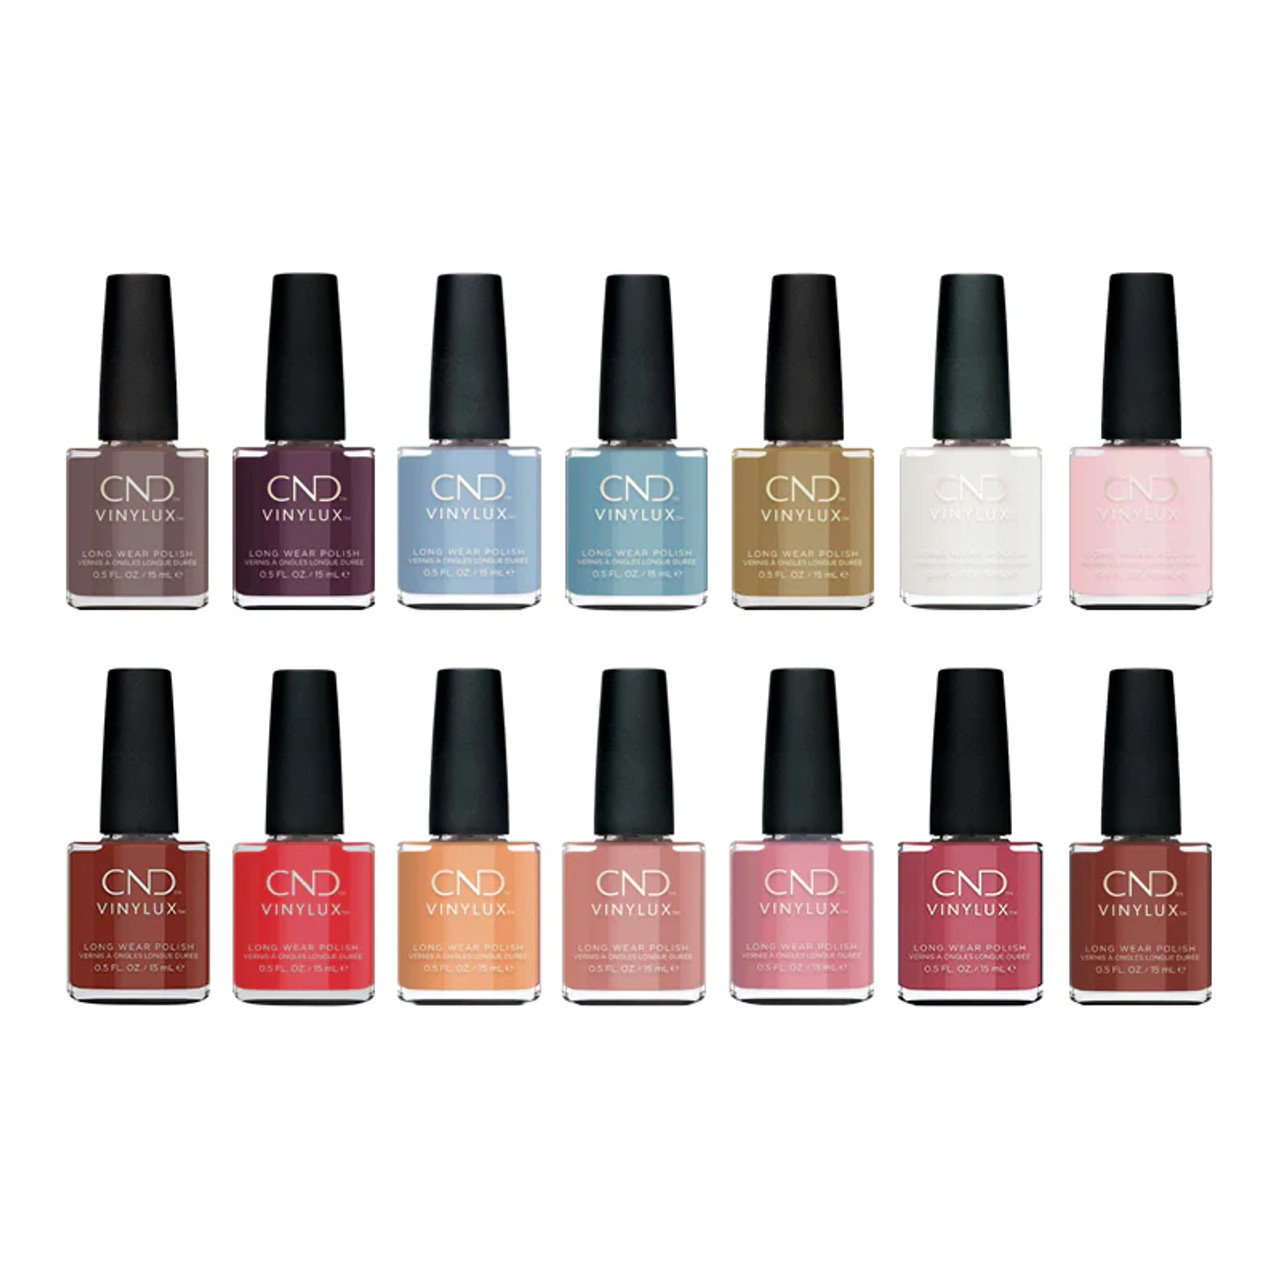 CND Vinylux Nail Polish Overstock Sales @ 70% OFF